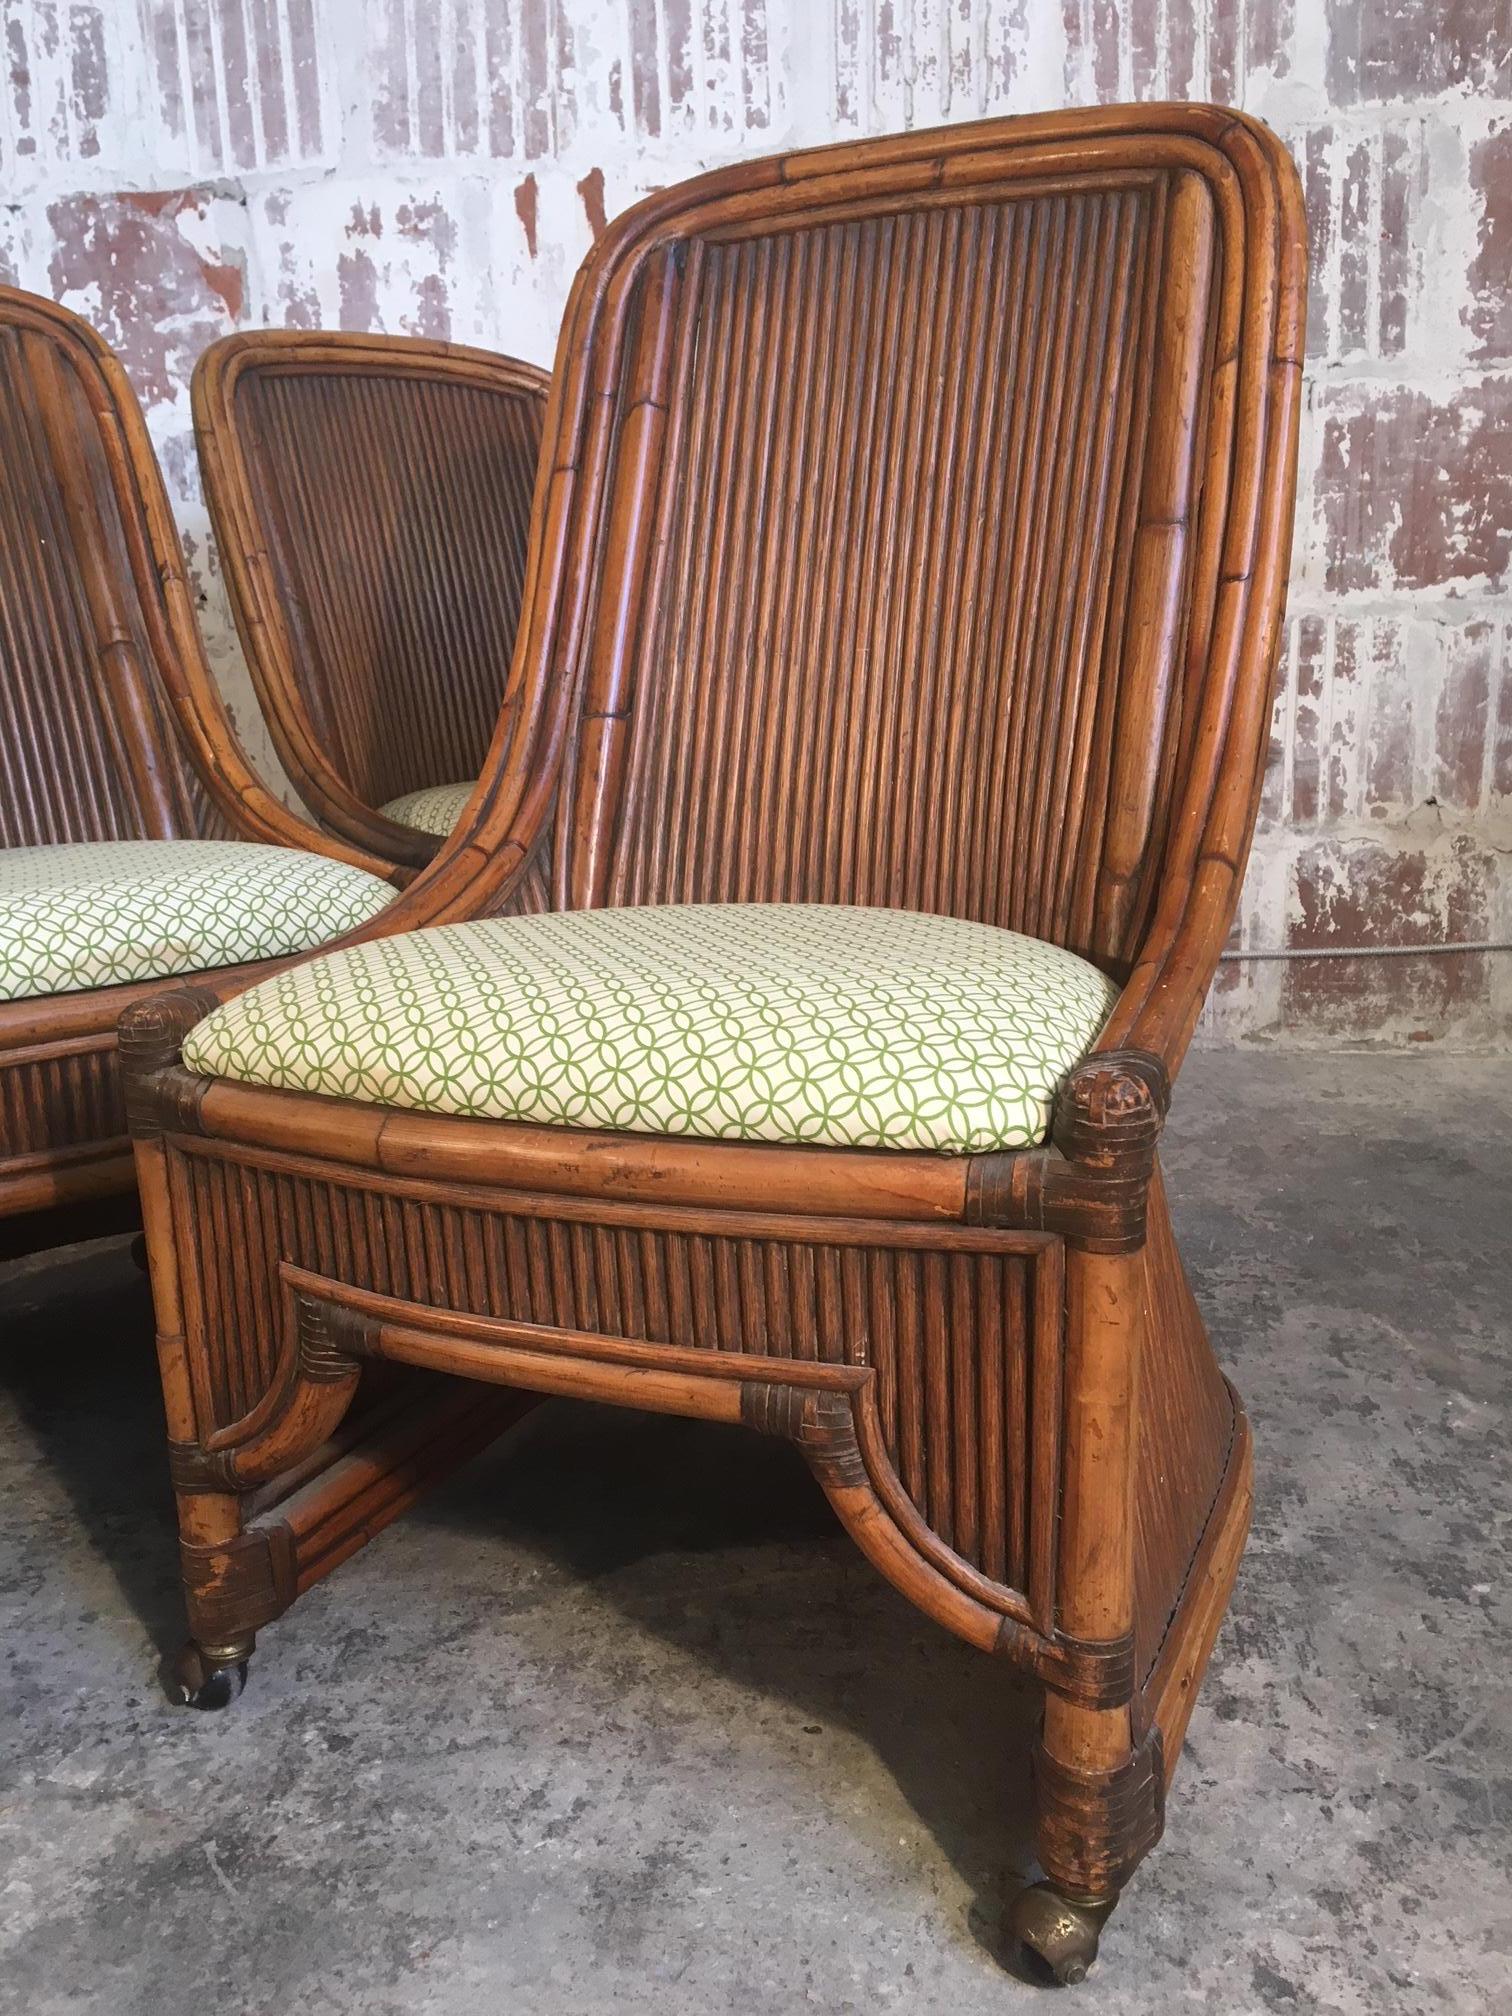 Set of 4 rattan dining chairs feature high back bamboo framework and caster wheels. Very good vintage condition with very minor signs of age appropriate wear. Upholstery free of stains or wear.  Professional reupholstery available, ask for details.